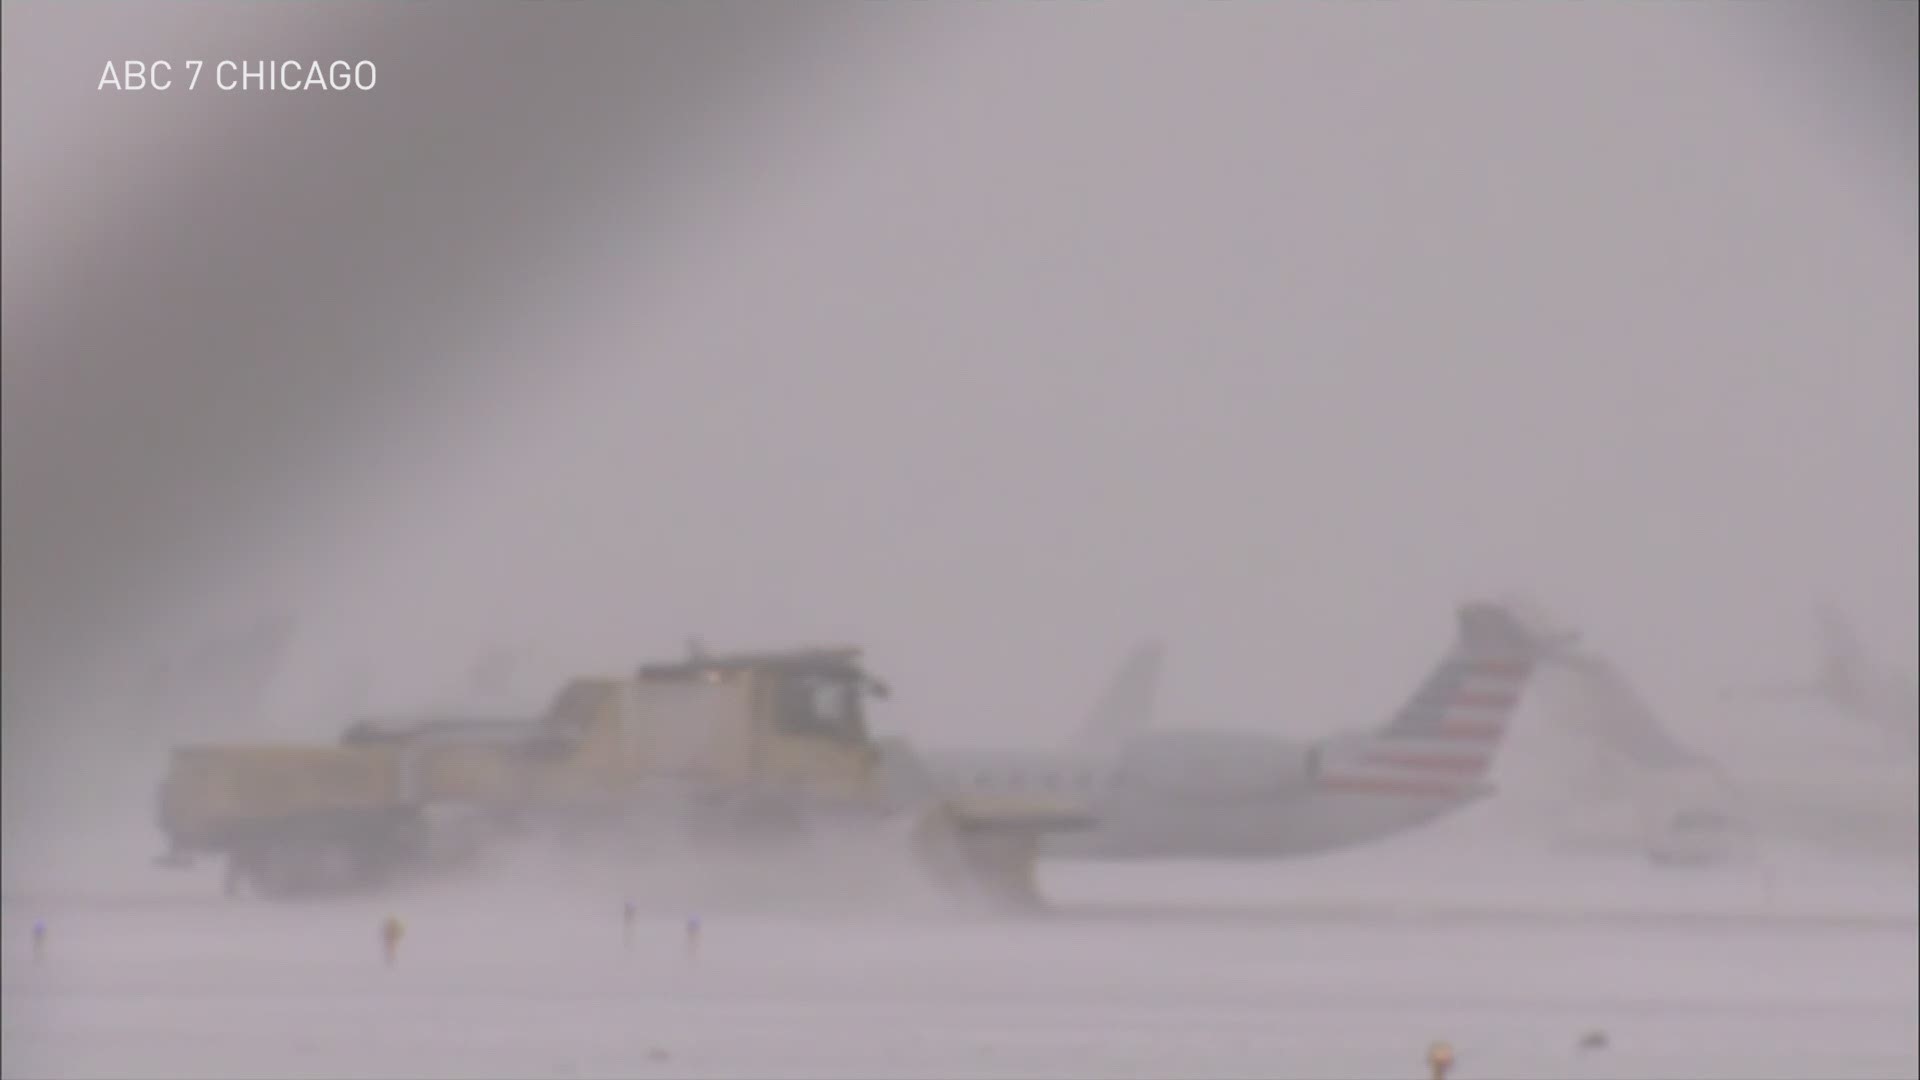 Snowfall in Chicago is taking its toll on air travel as one plane trying to land at O'Hare International Airport slid off the runway. (Video: ABC 7 Chicago via AP)